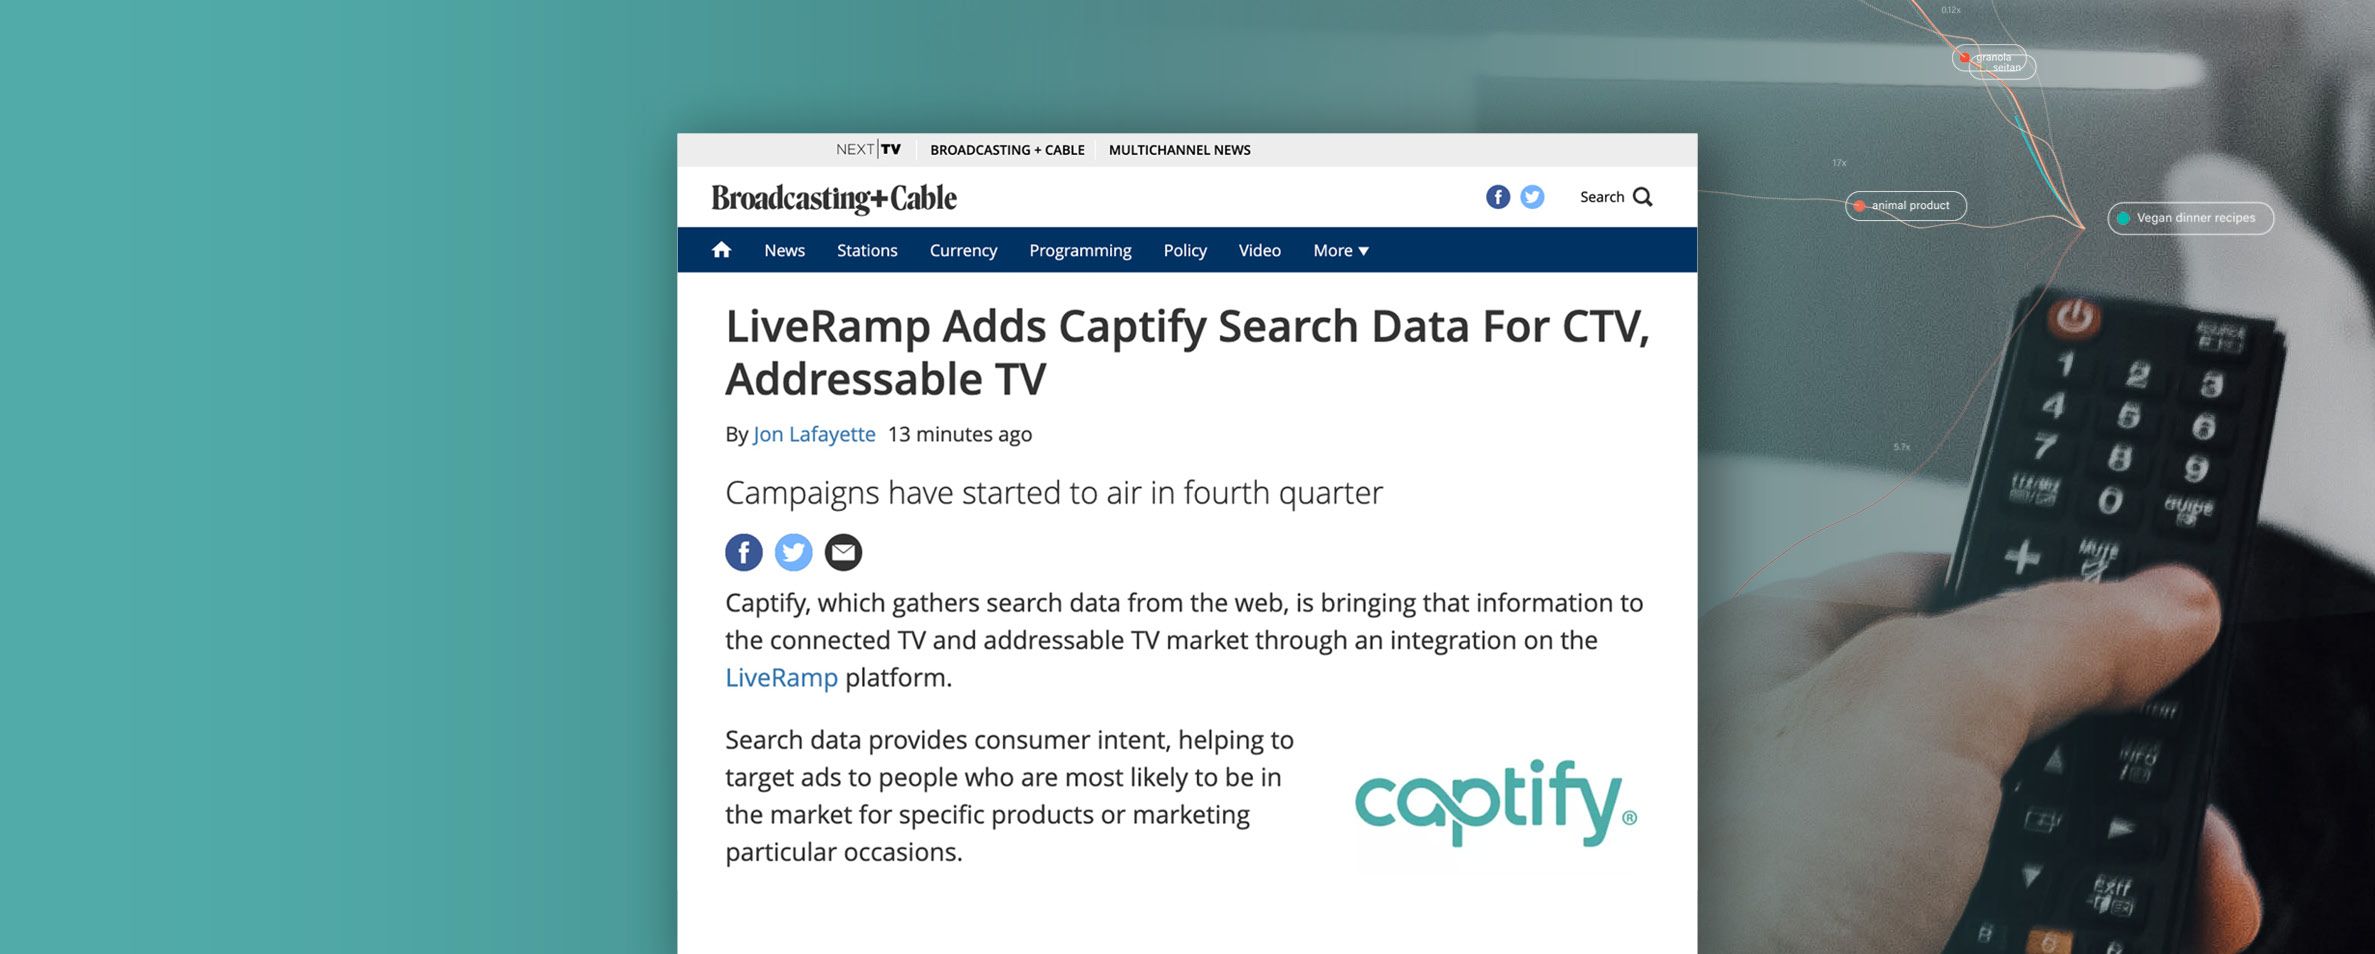 Broadcasting & Cable: LiveRamp Adds Captify Search Data For CTV, Addressable TV